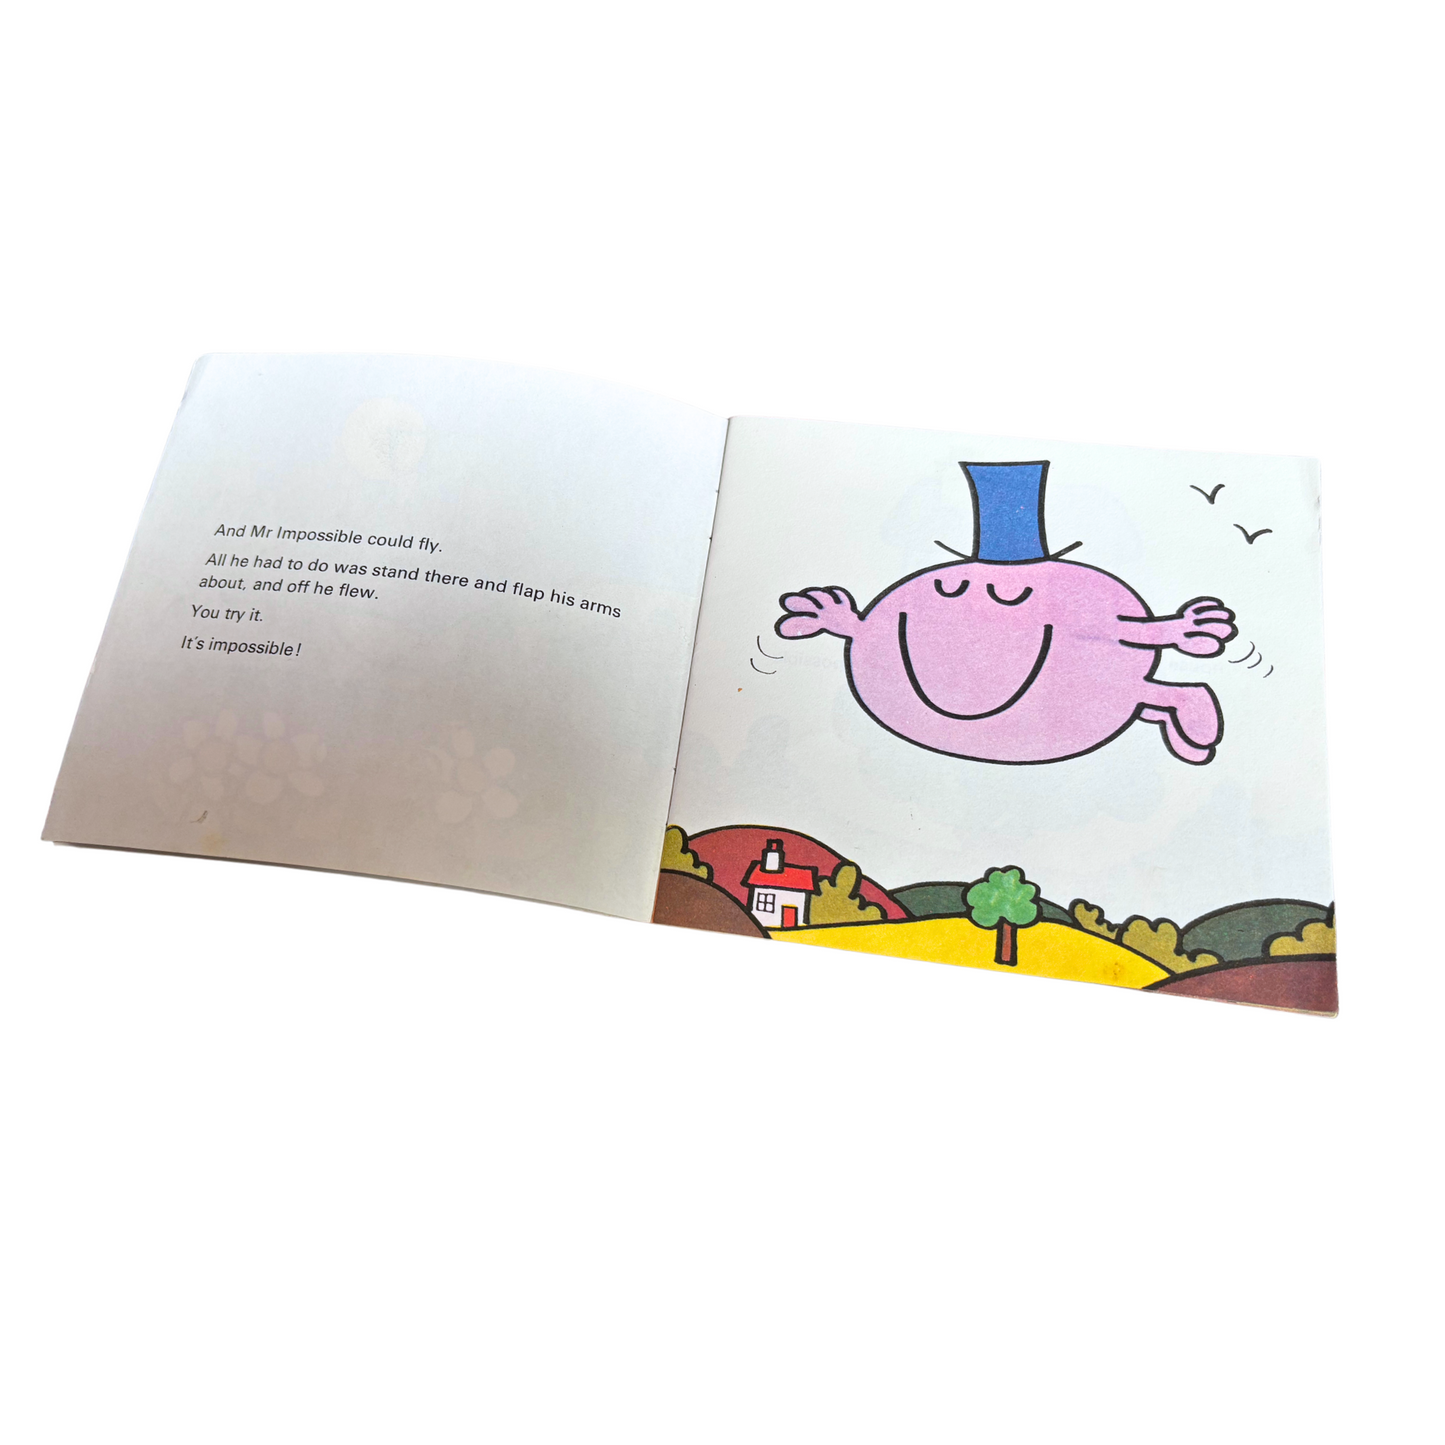 Mr. Impossible by Roger Hargreaves. Original 1970s The Mr Men series. 1976   edition.Great gift idea